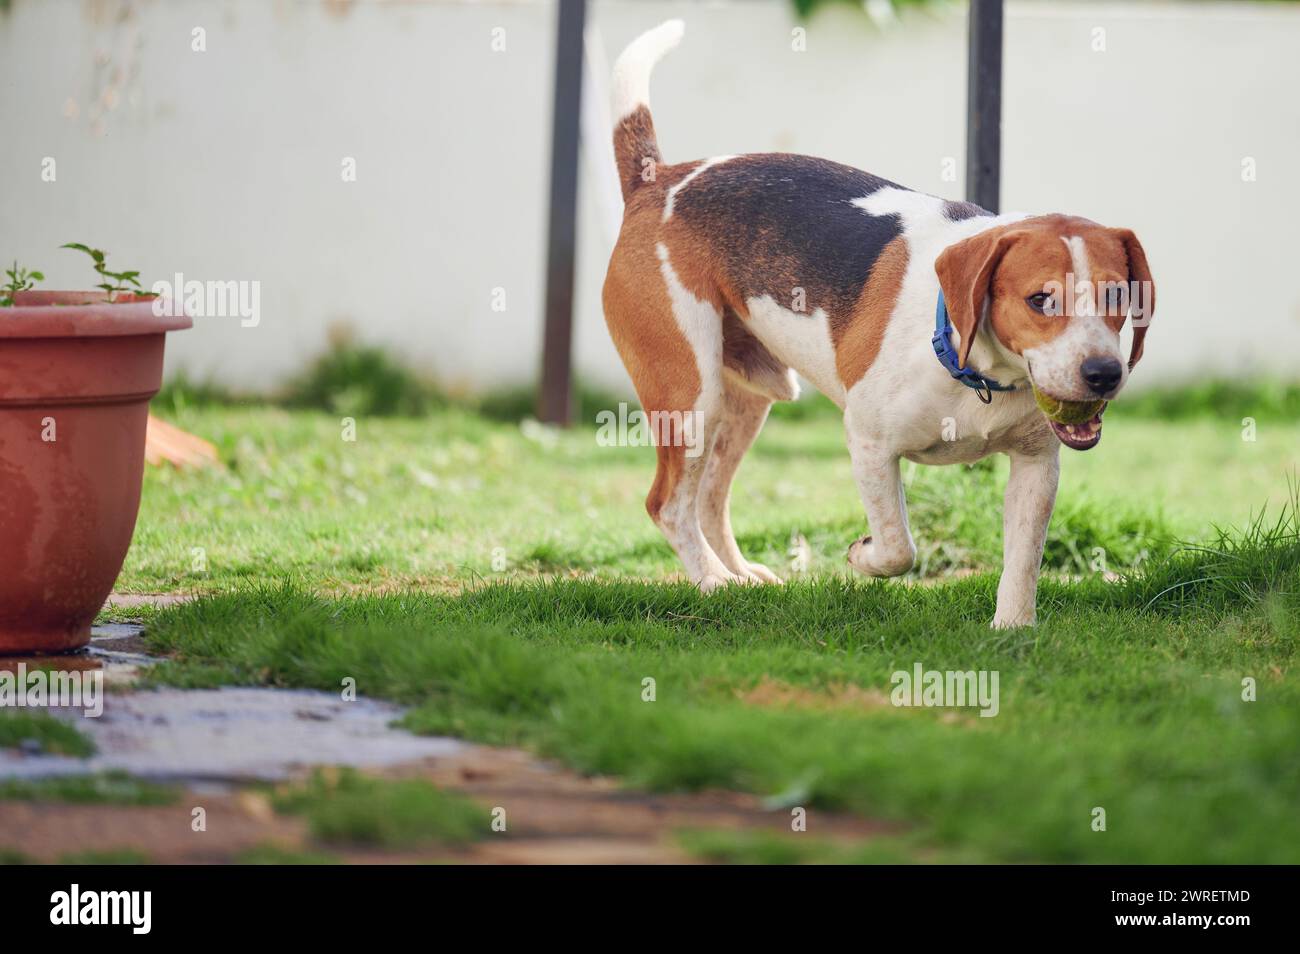 Cute funny beagle dog running with ball on garden Stock Photo